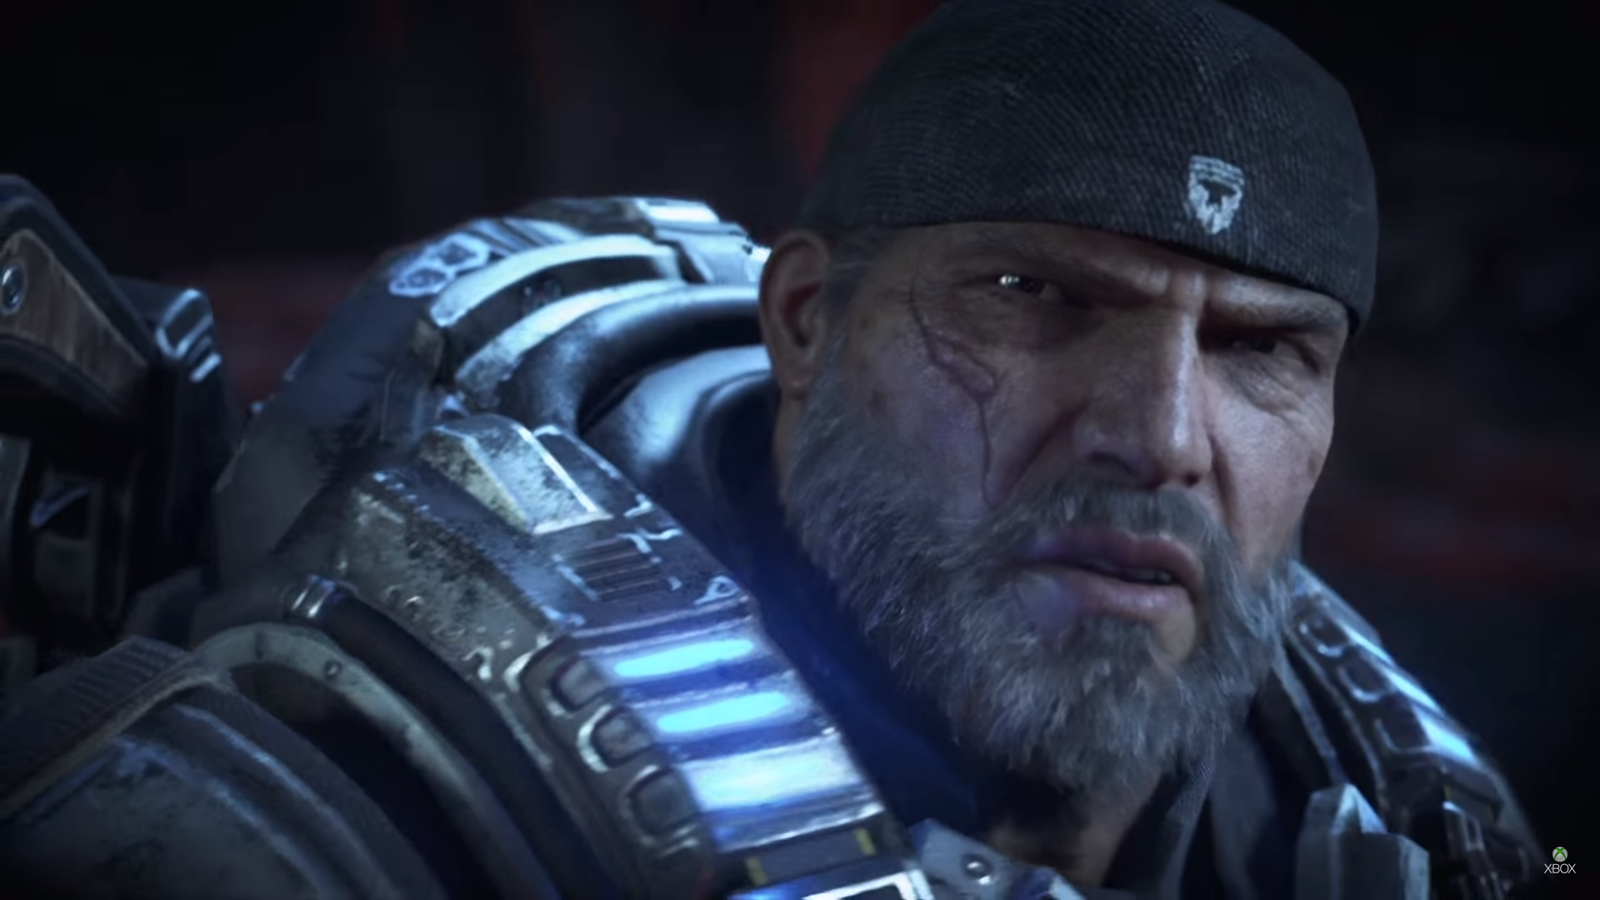 Buy Gears of War 4 on Xbox One, Get All Previous Games Free for Limited  Time - GameSpot